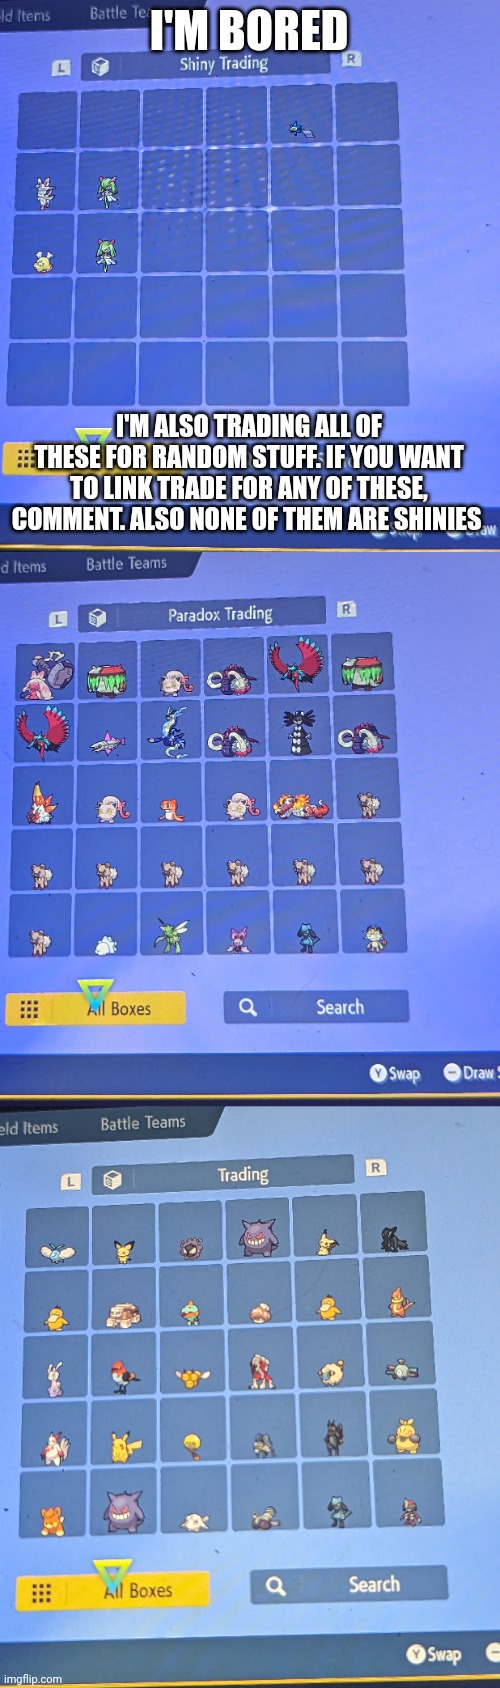 Plz trade I'm bored | I'M BORED; I'M ALSO TRADING ALL OF THESE FOR RANDOM STUFF. IF YOU WANT TO LINK TRADE FOR ANY OF THESE, COMMENT. ALSO NONE OF THEM ARE SHINIES | image tagged in chicken nuggets | made w/ Imgflip meme maker